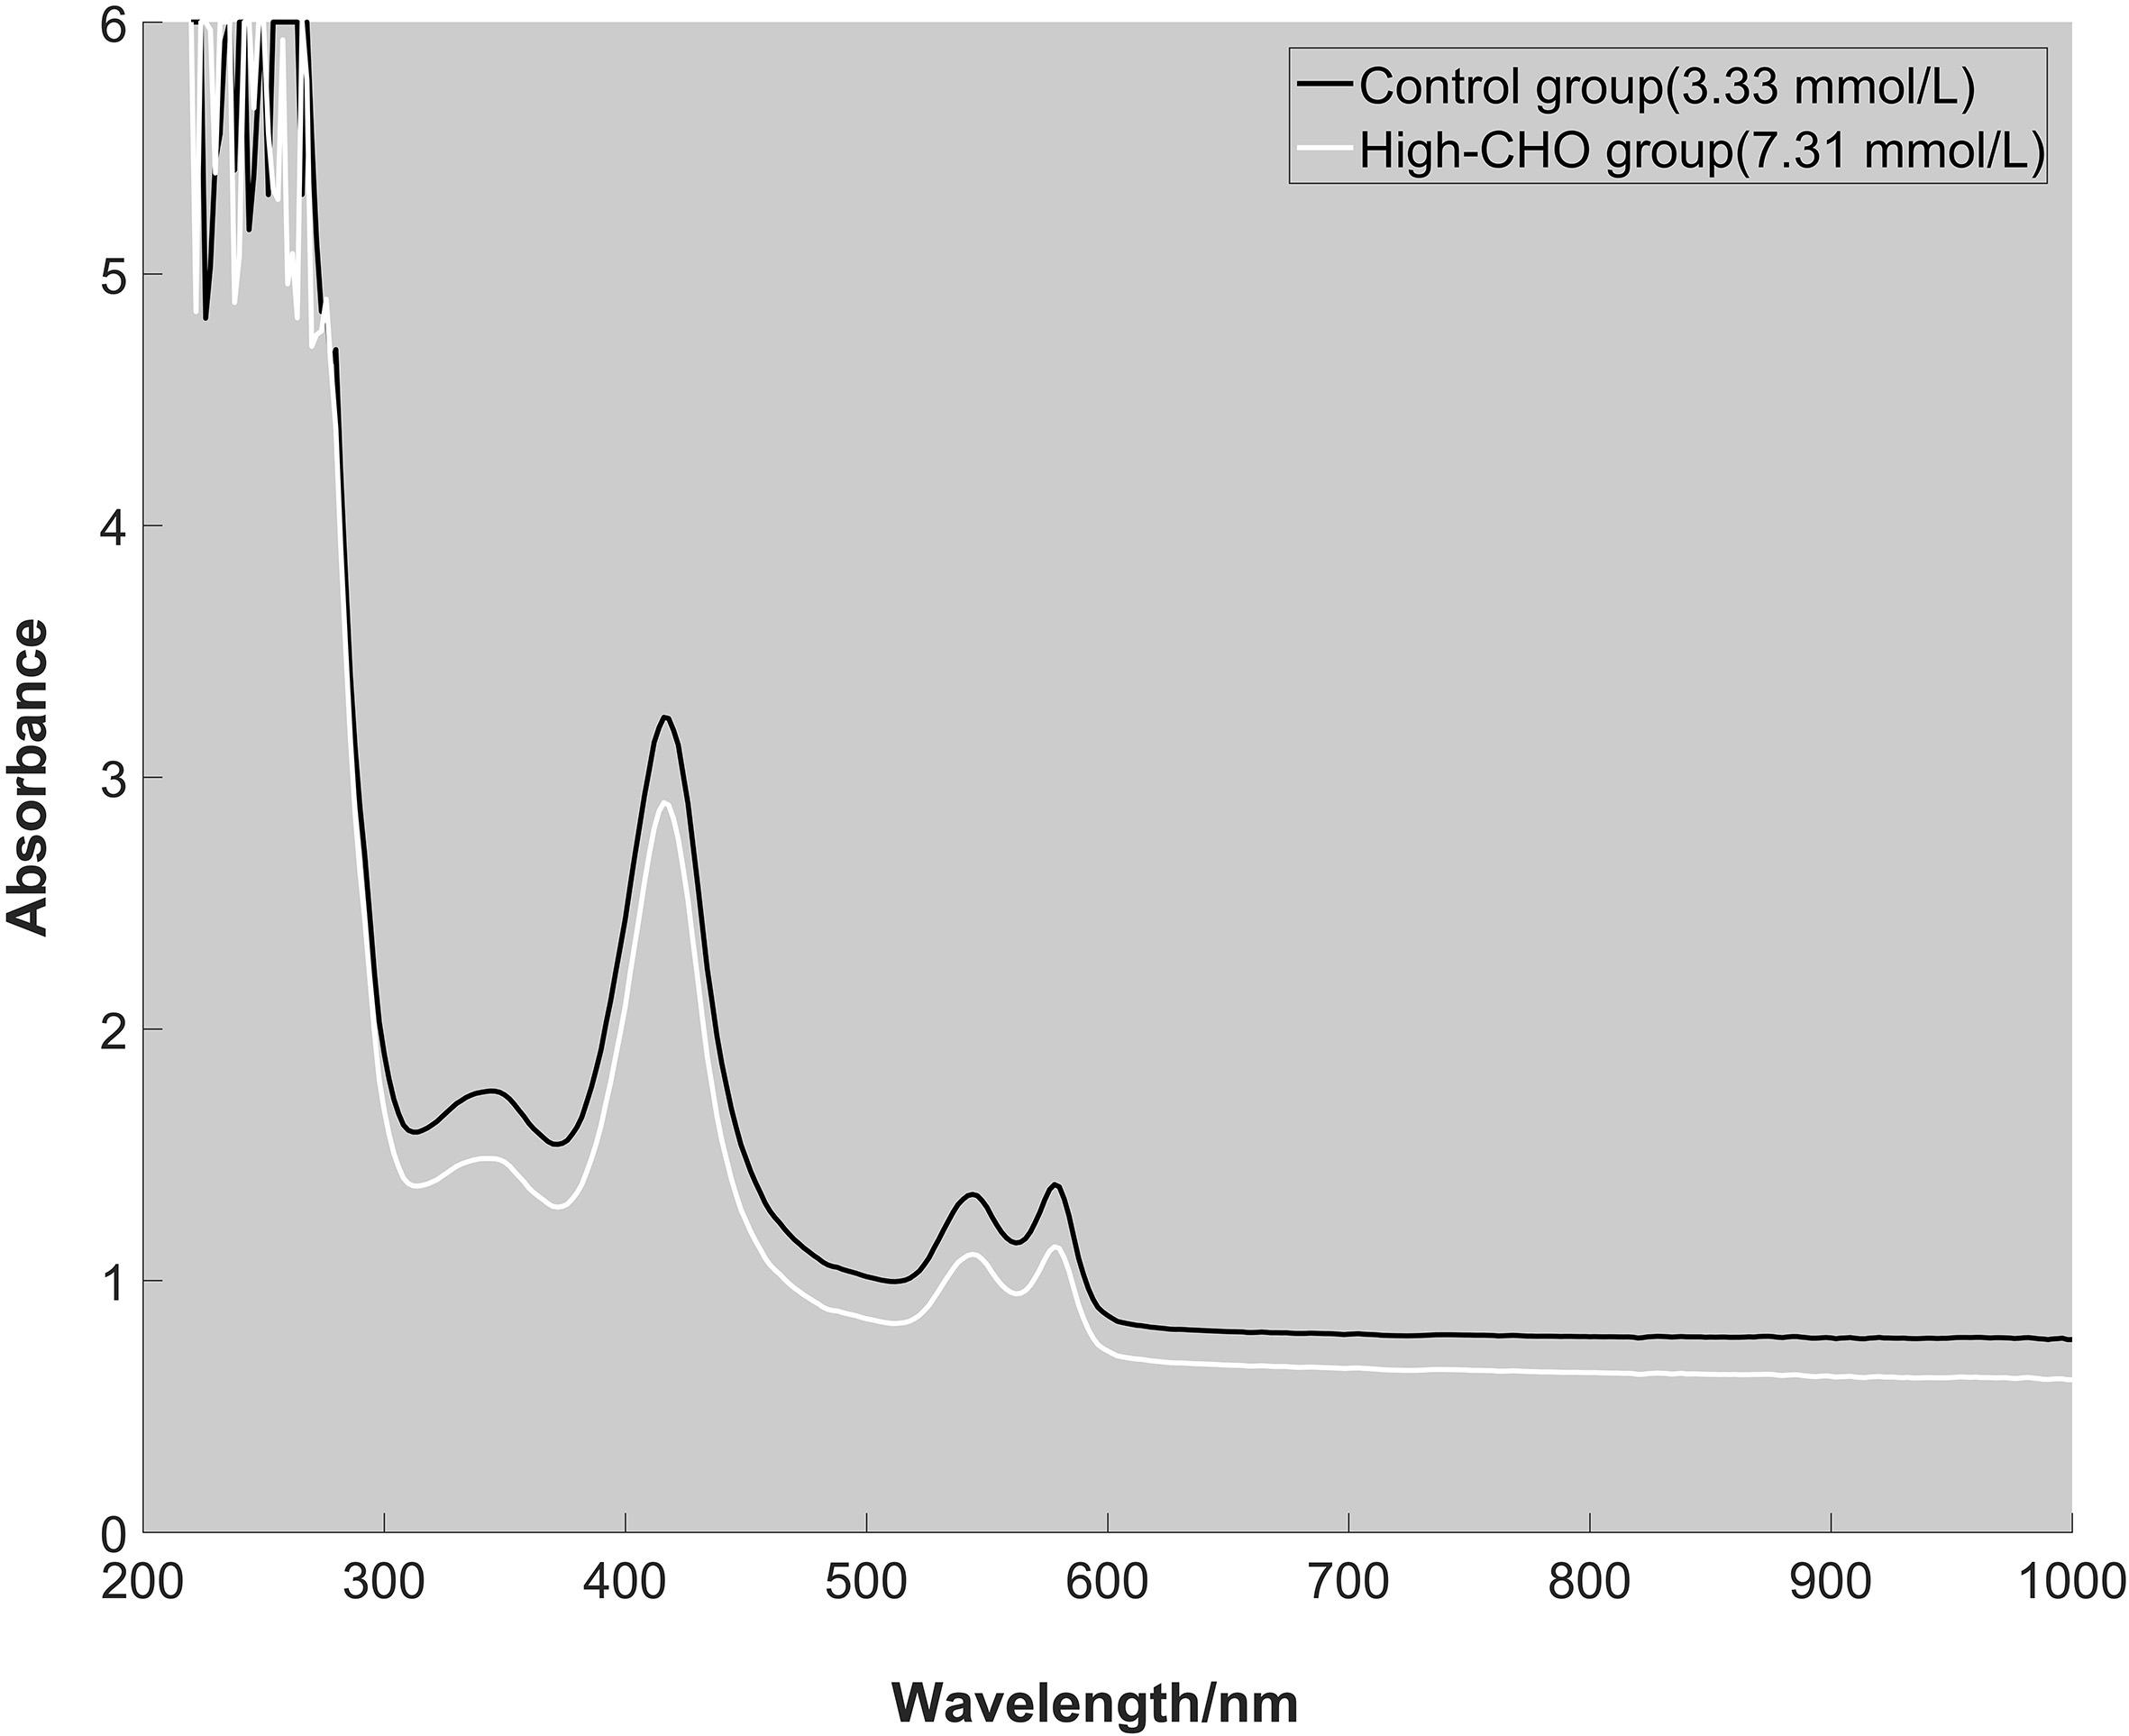 The absorption spectra of two erythrocyte samples from control group (CHO: 3.33 mmol/L) and high-CHO group (CHO: 7.31 mmol/L).